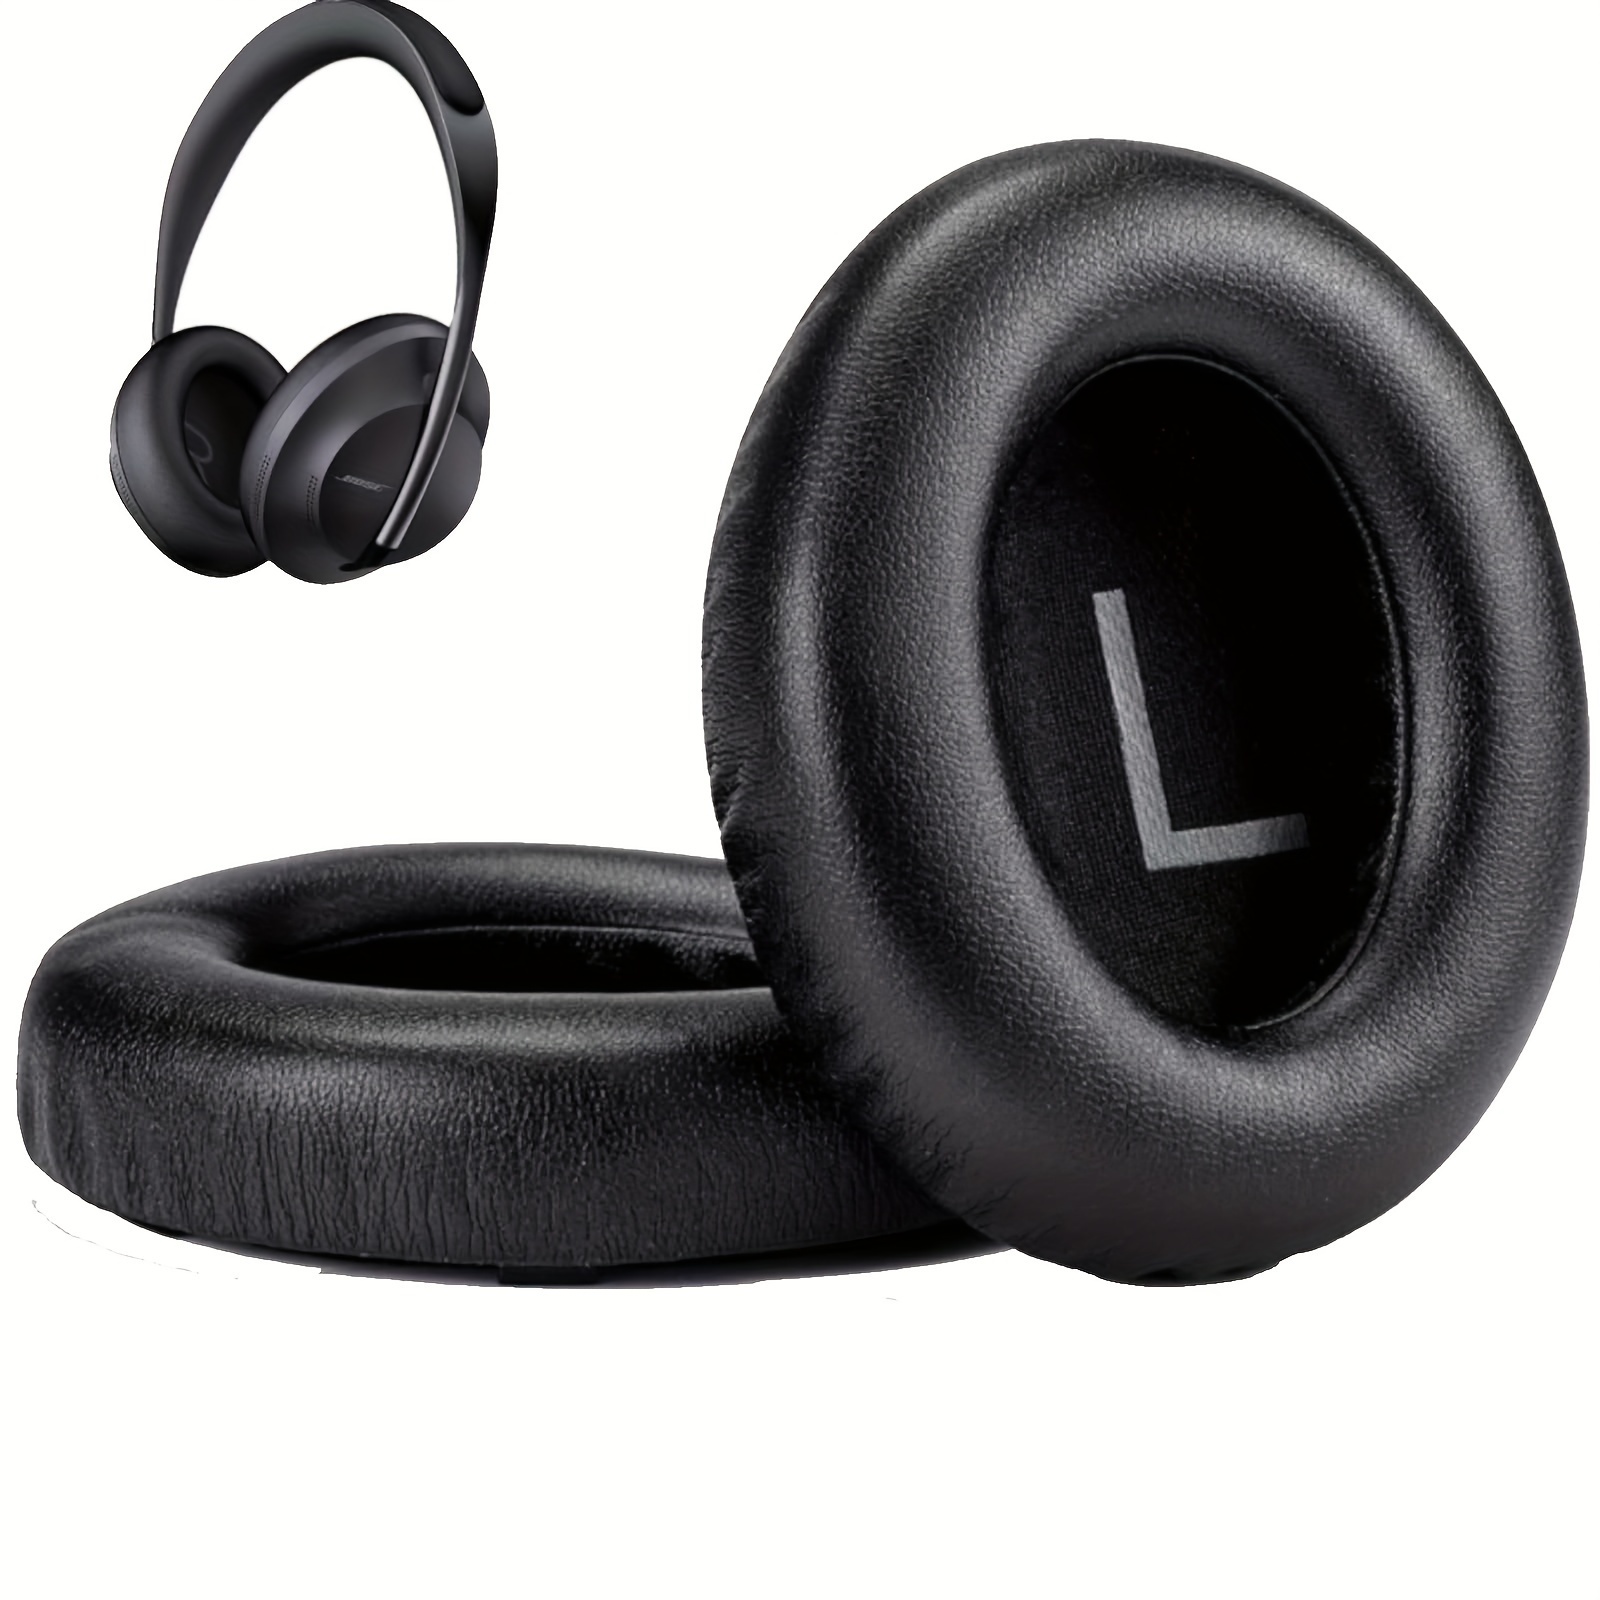 

Replacement Nc700 Ear Pads For Bose 700 Headphone, High-density Noise Cancelling Nc700 Bose Headphones Ear Pads, Bose Nc700 Earpad Cushions With Softer Leather(black)